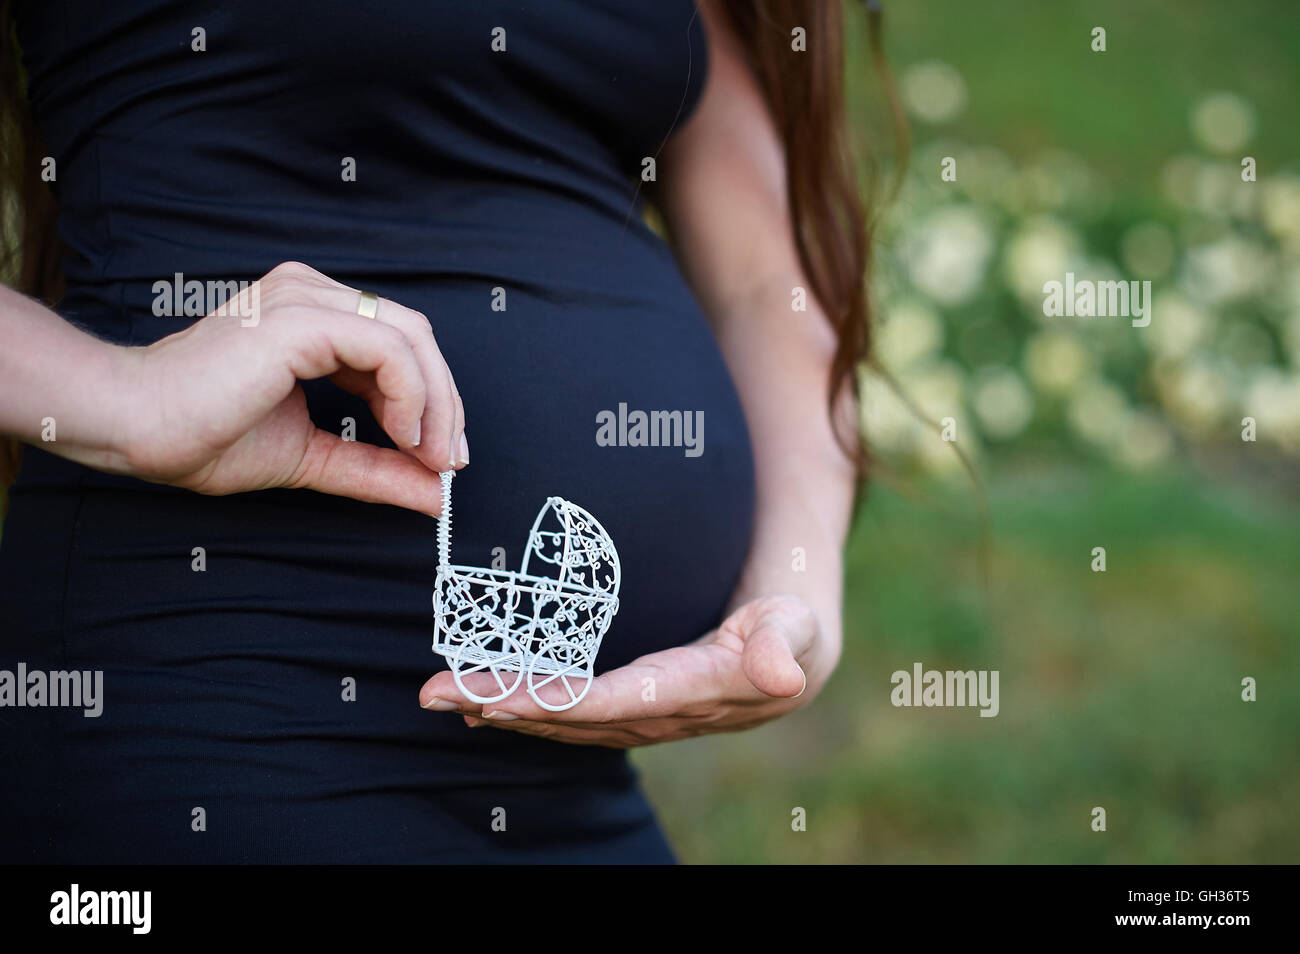 Pregnancy concept: belly with hand holding small toy stroller Stock Photo